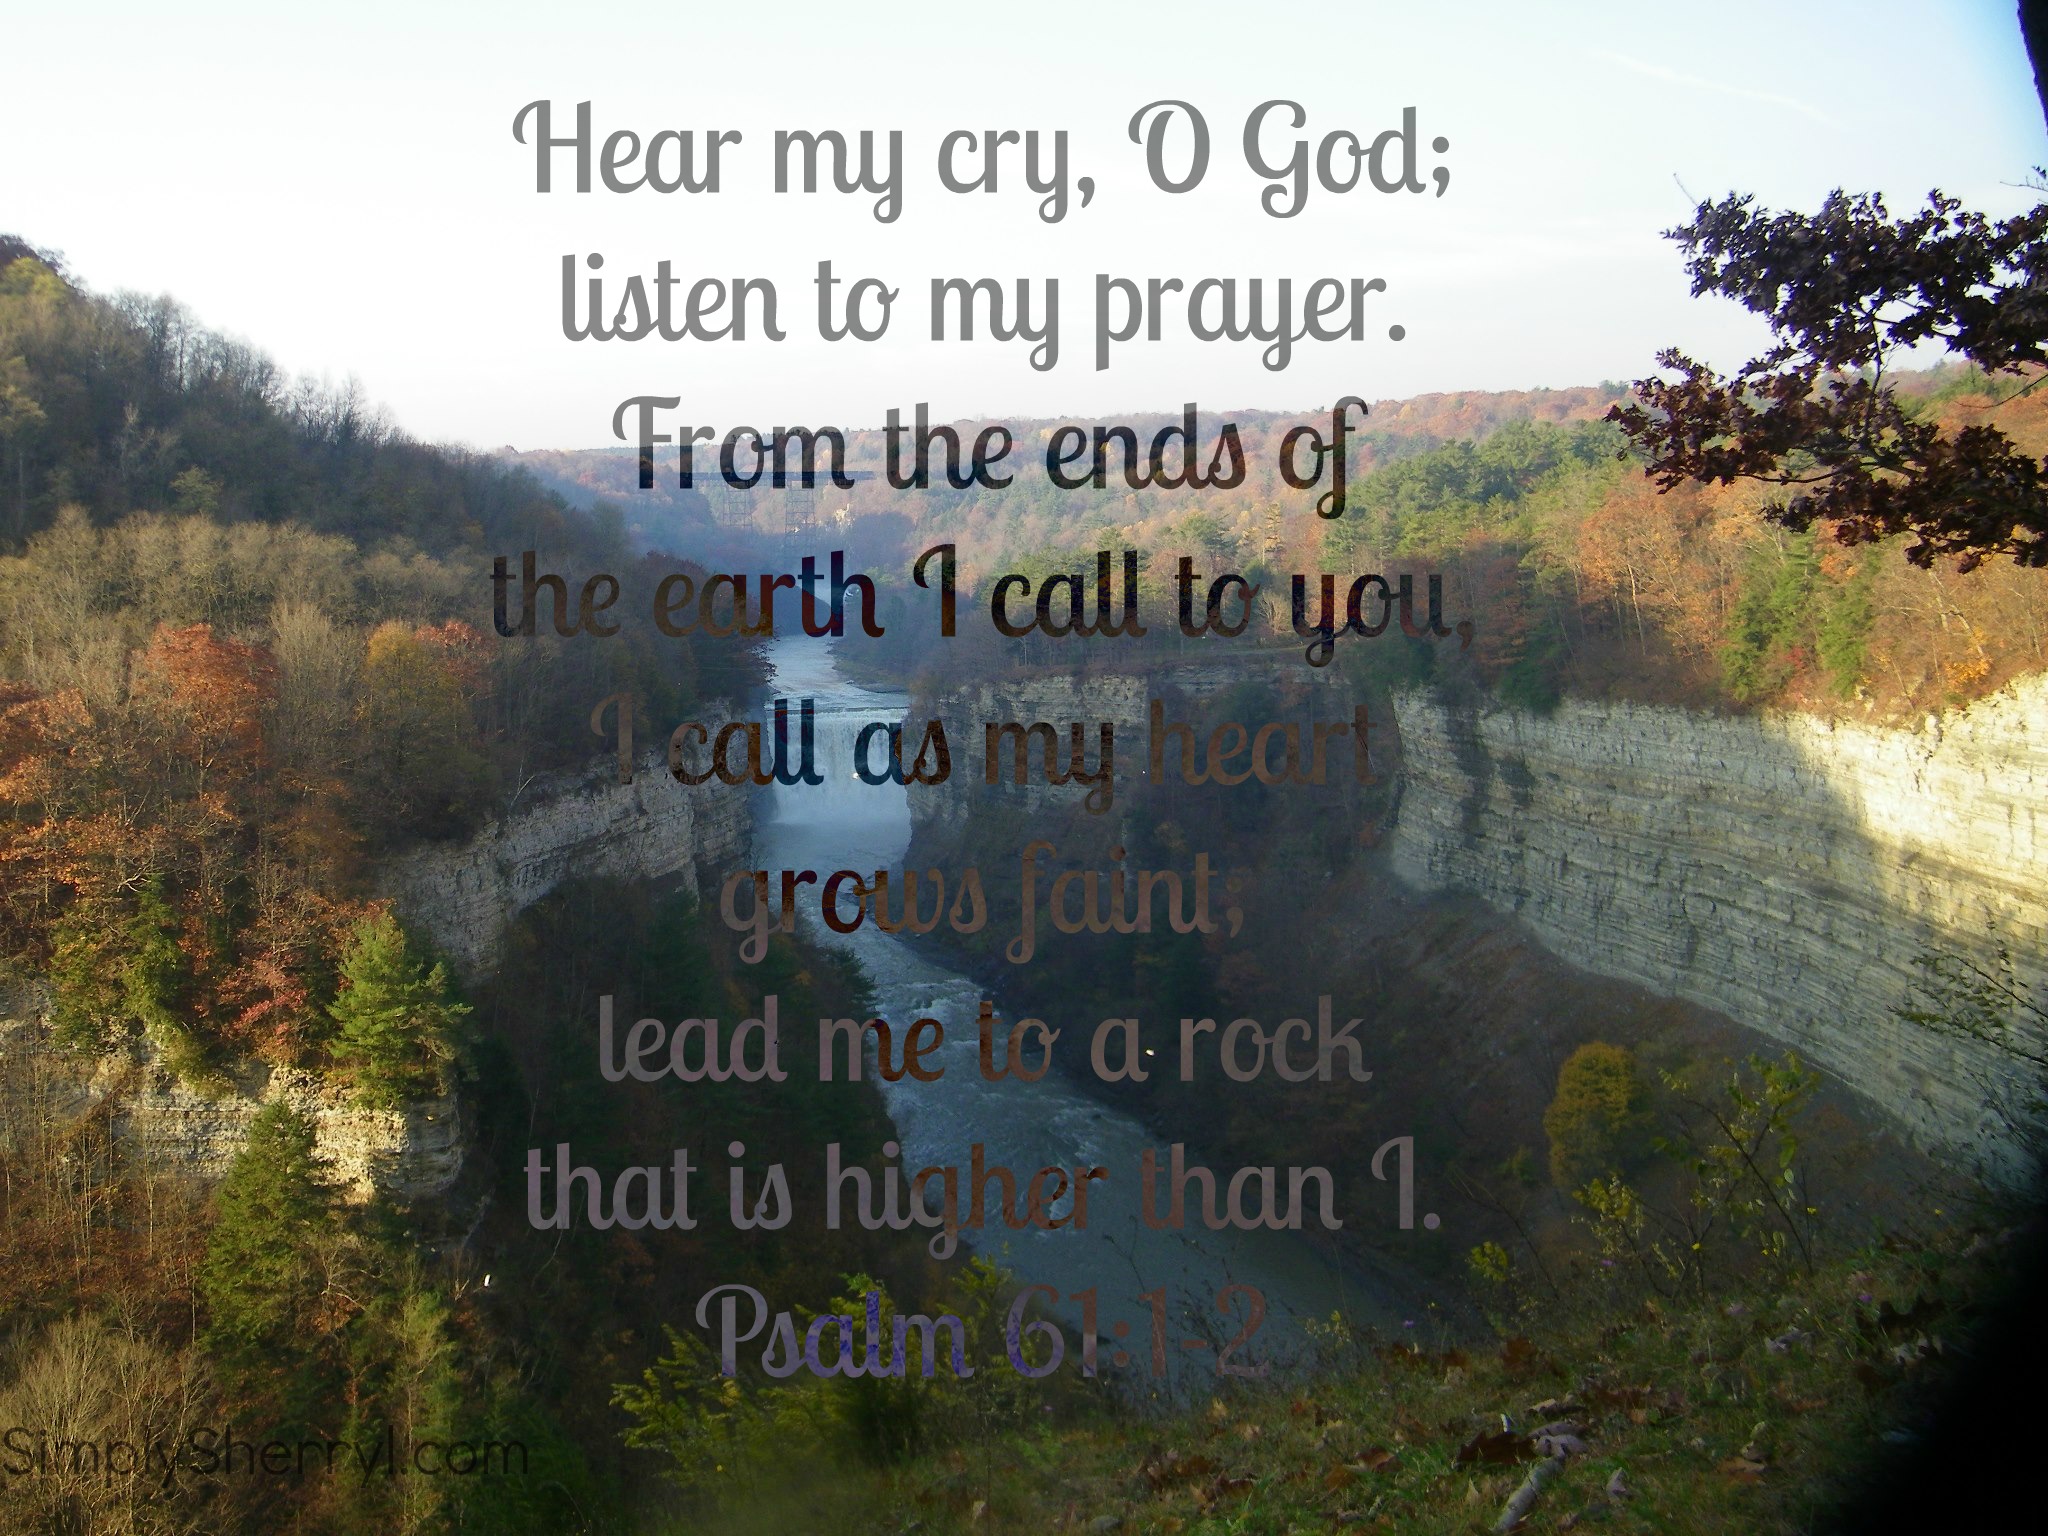 Psalm 61:1-2 The Rock that is Higher than I